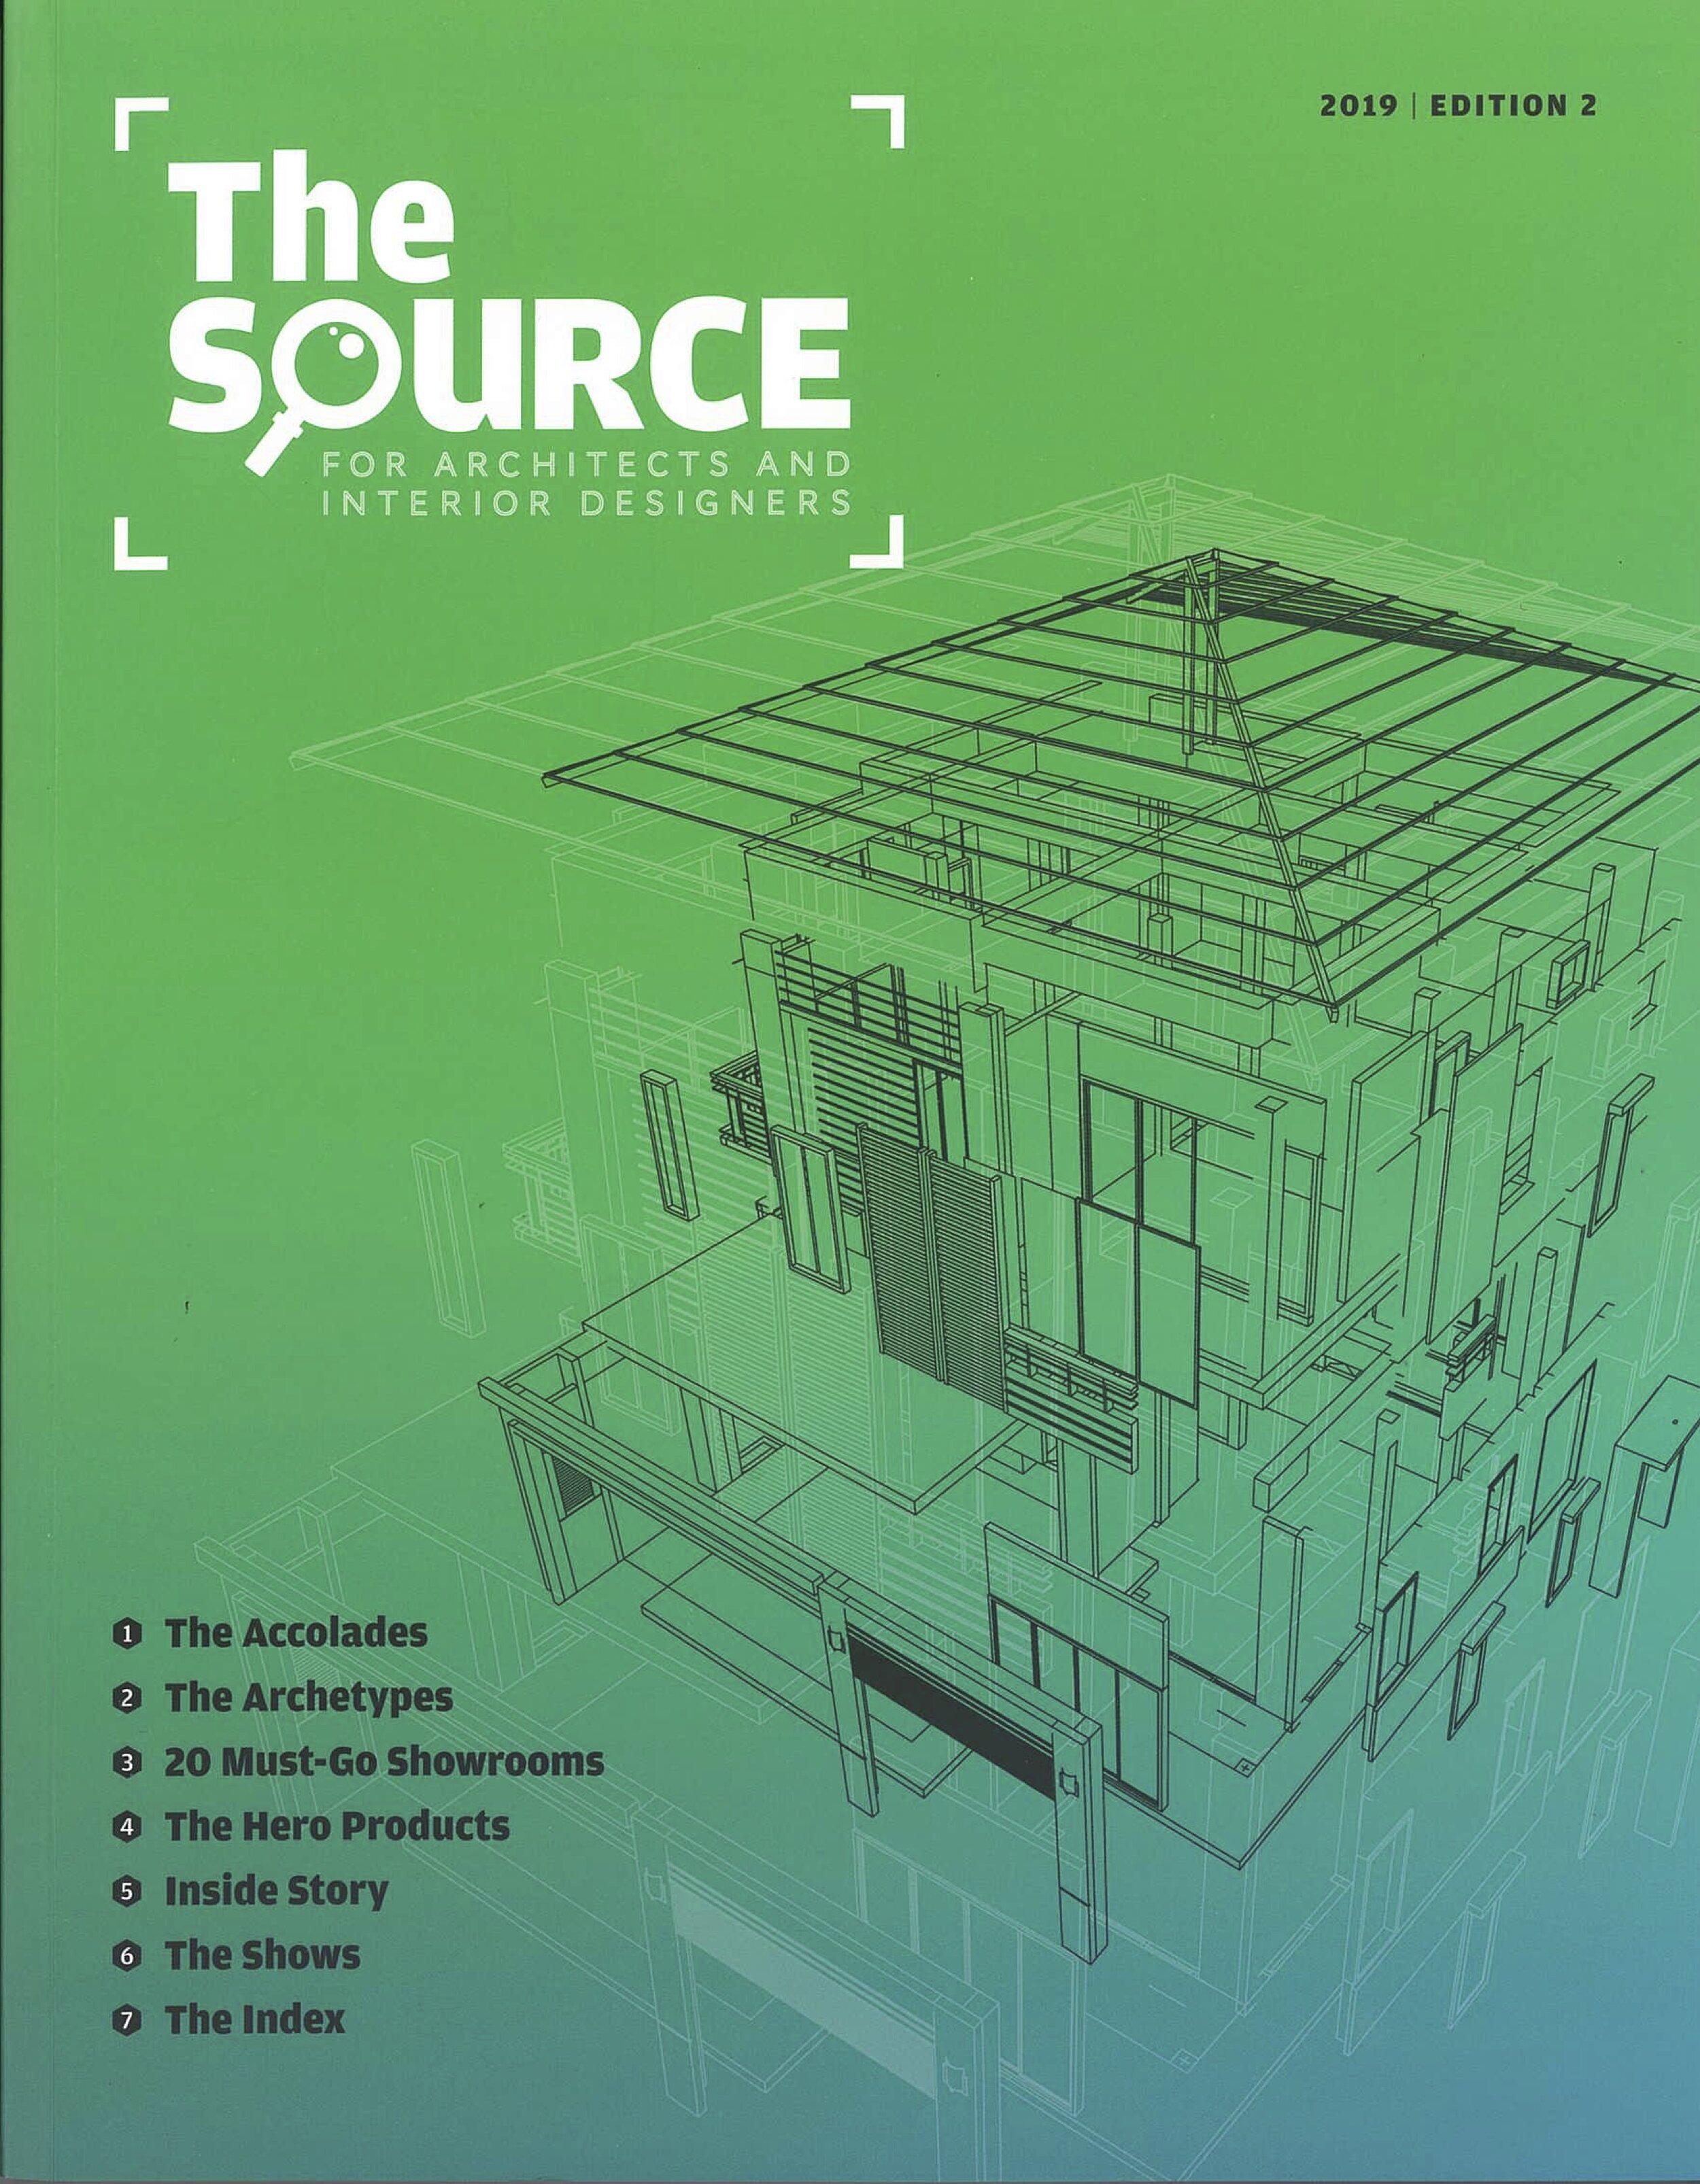 The Source_2019 Edition 2_P16-171.jpg